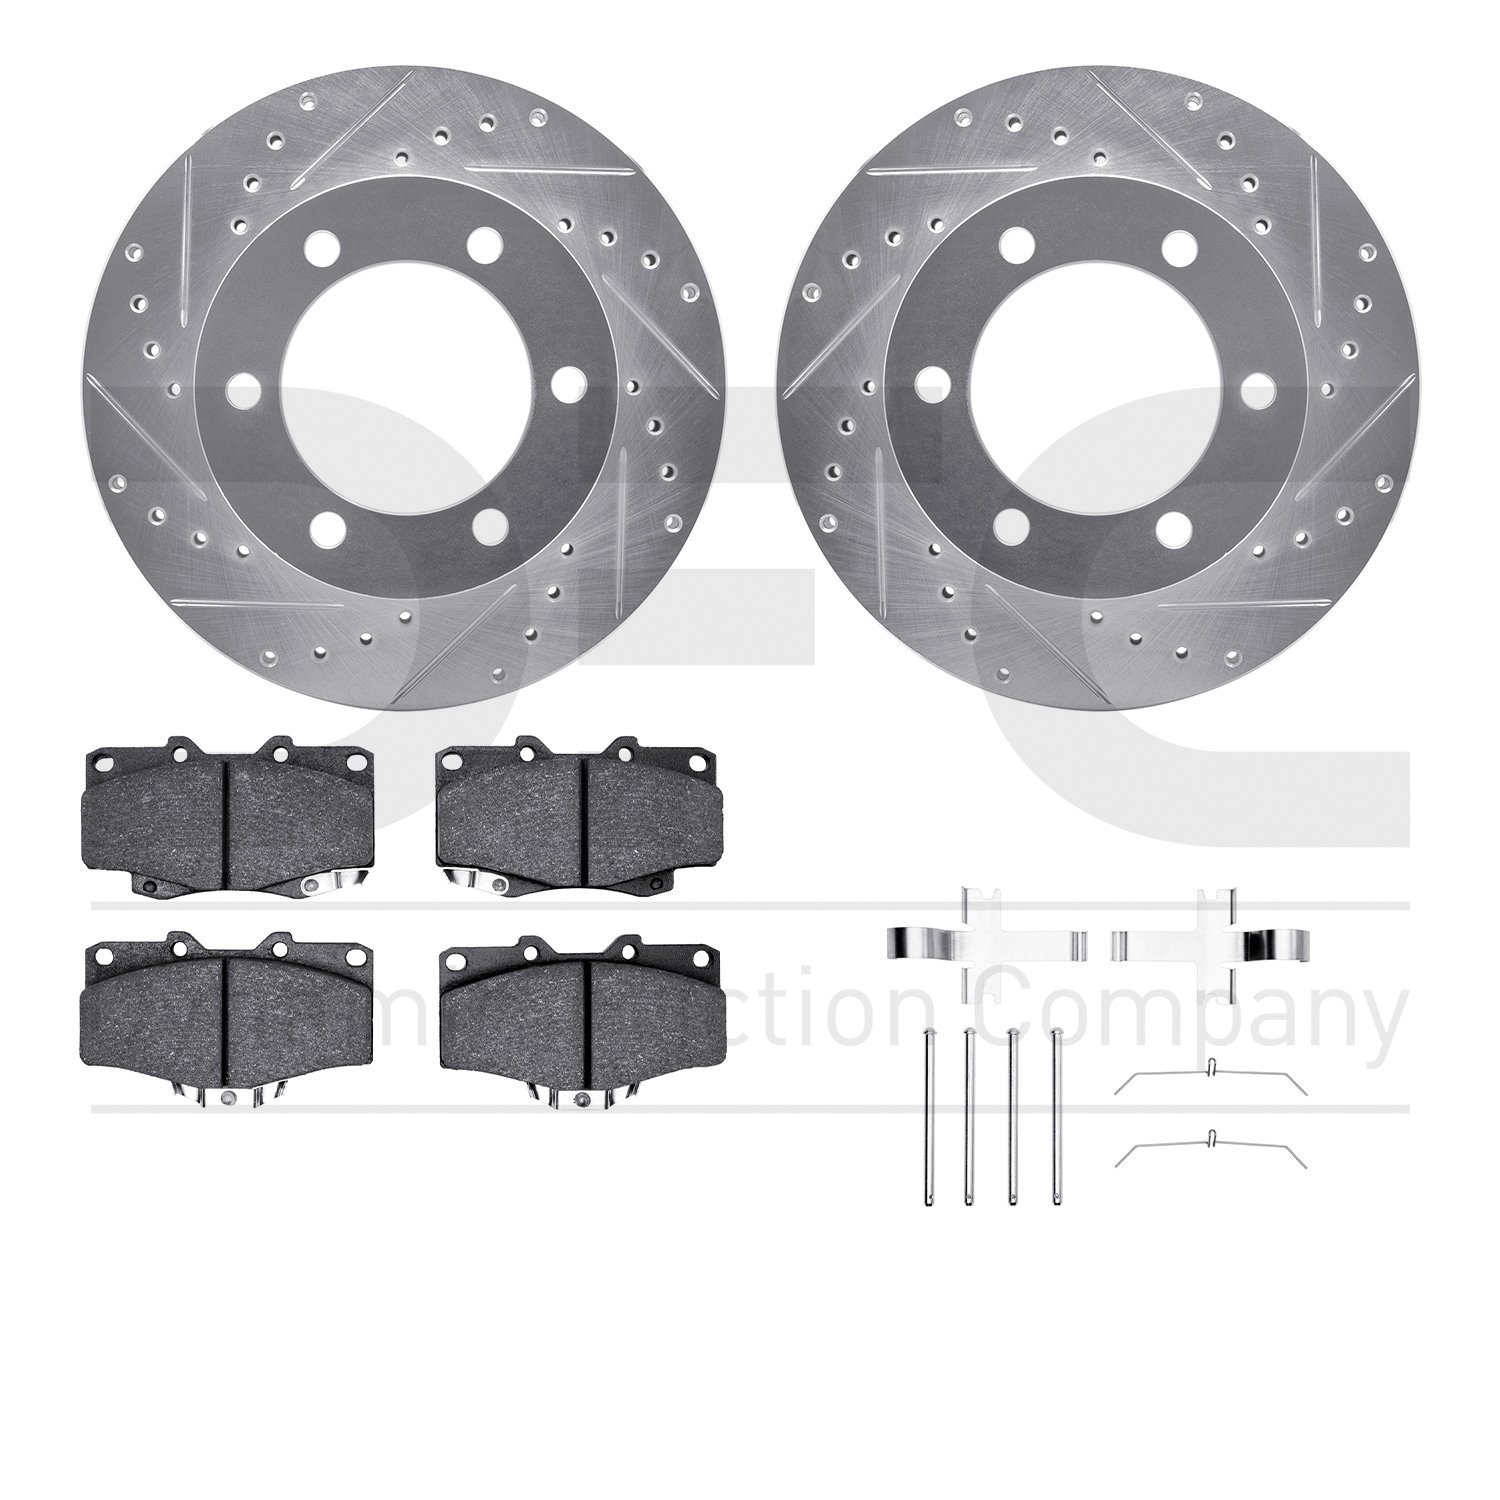 7412-76011 Drilled/Slotted Brake Rotors with Ultimate-Duty Brake Pads Kit & Hardware [Silver], 1995-2004 Lexus/Toyota/Scion, Pos